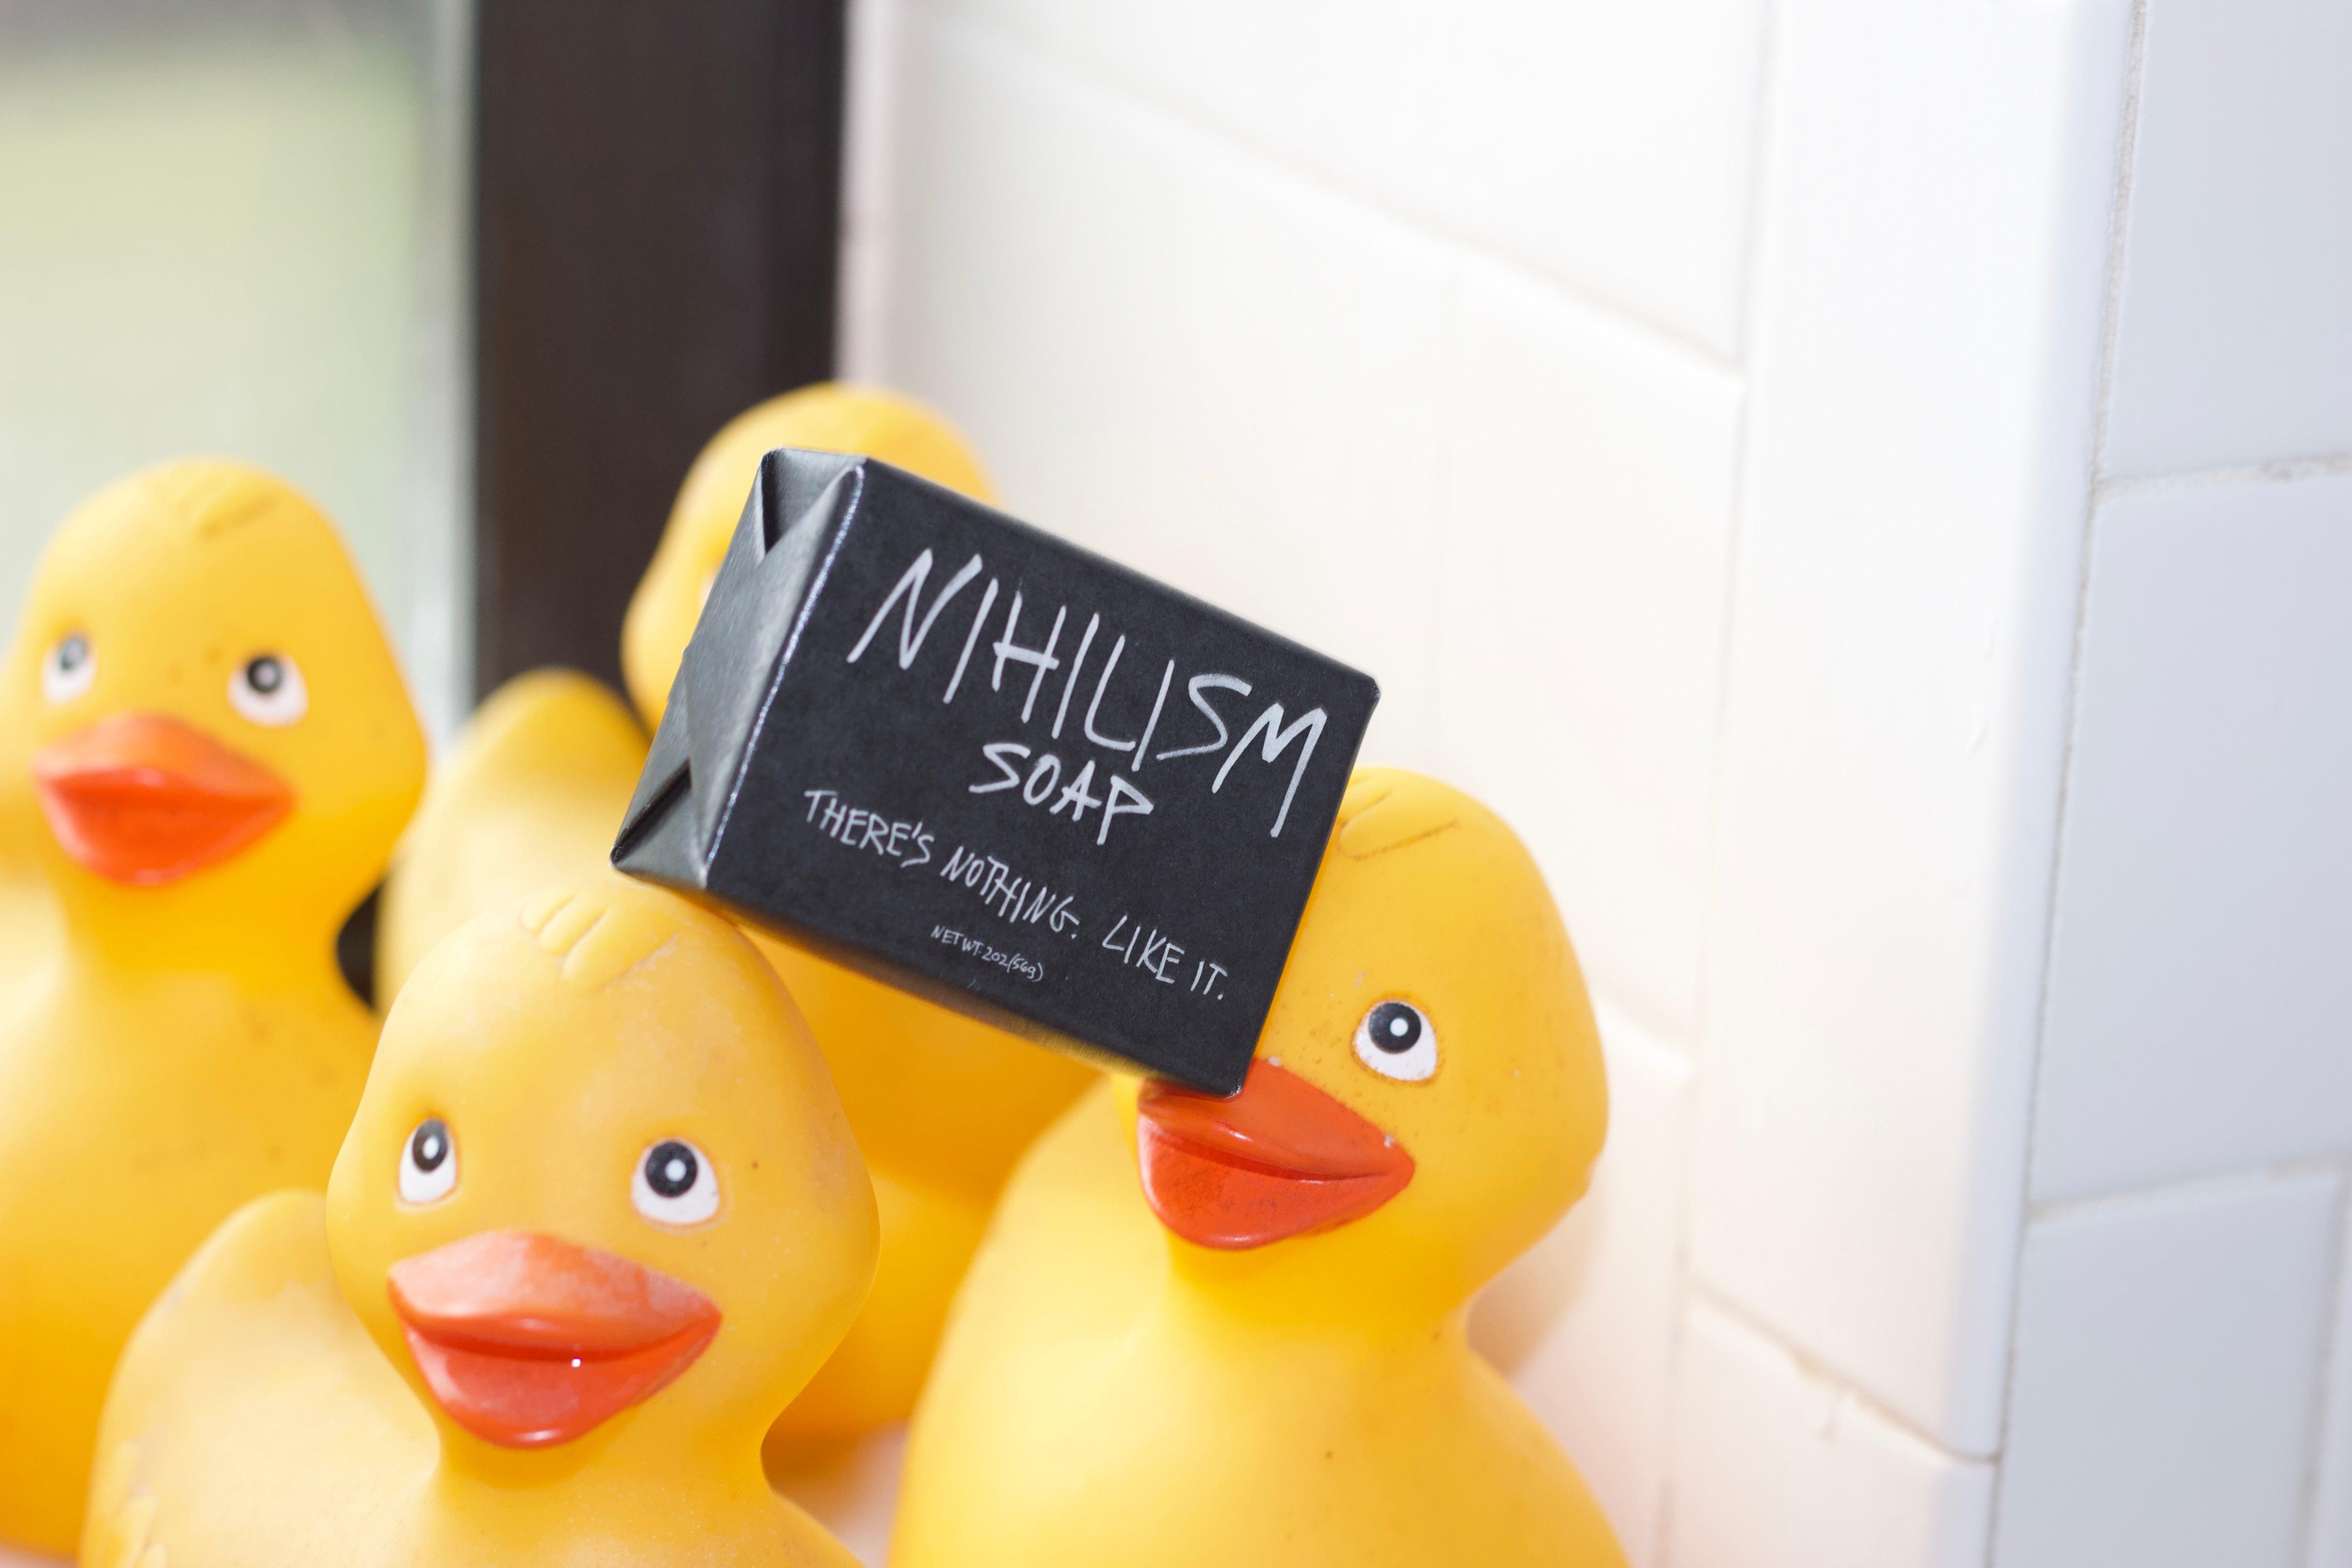 Product photo of Nihilism Soap, a novelty gift manufactured by The Unemployed Philosophers Guild.